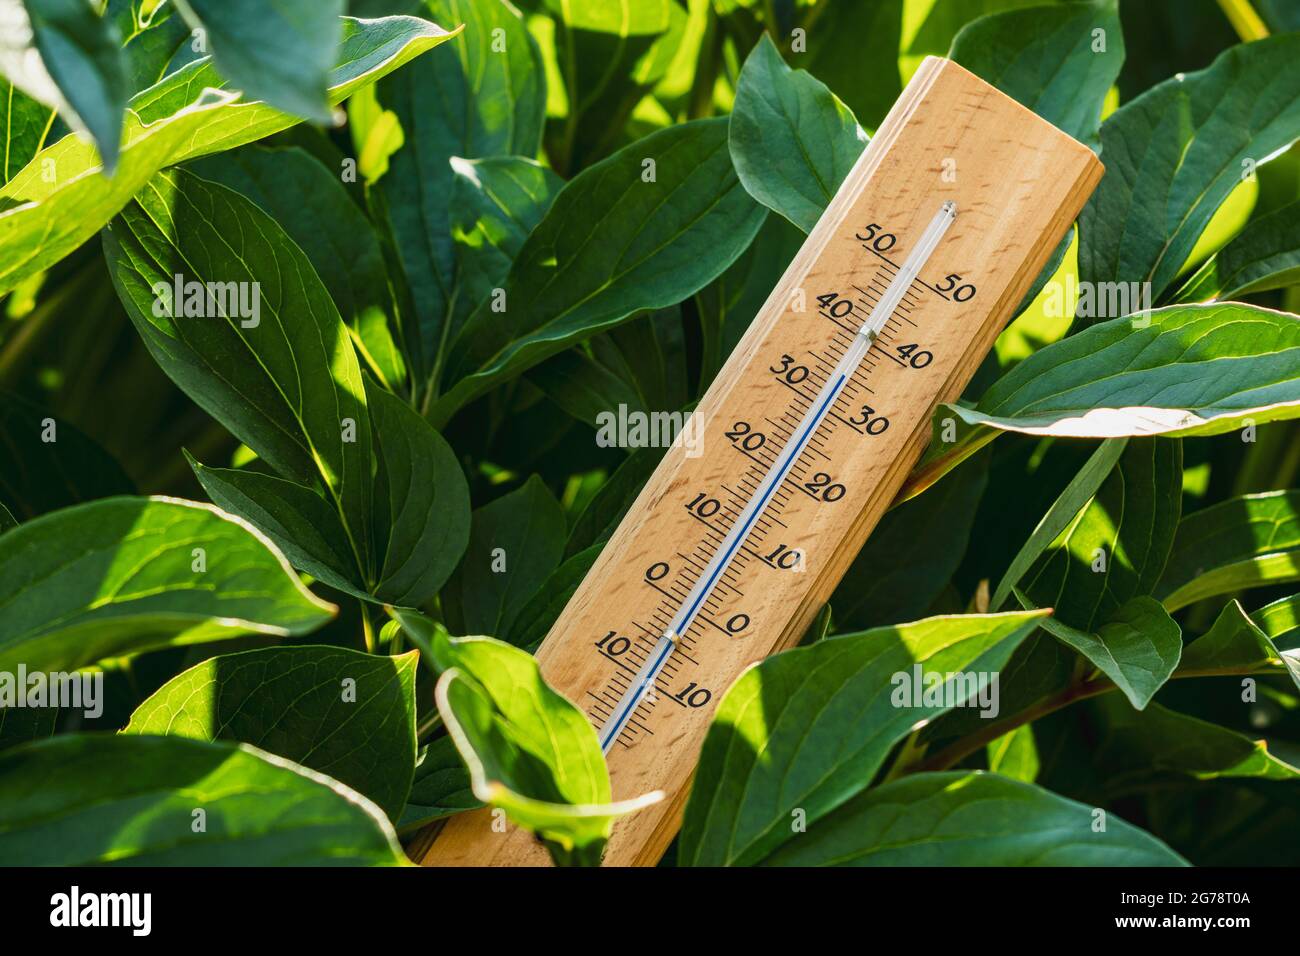 https://c8.alamy.com/comp/2G78T0A/thermometer-between-garden-plants-thermometer-shows-very-hot-summer-temperature-2G78T0A.jpg